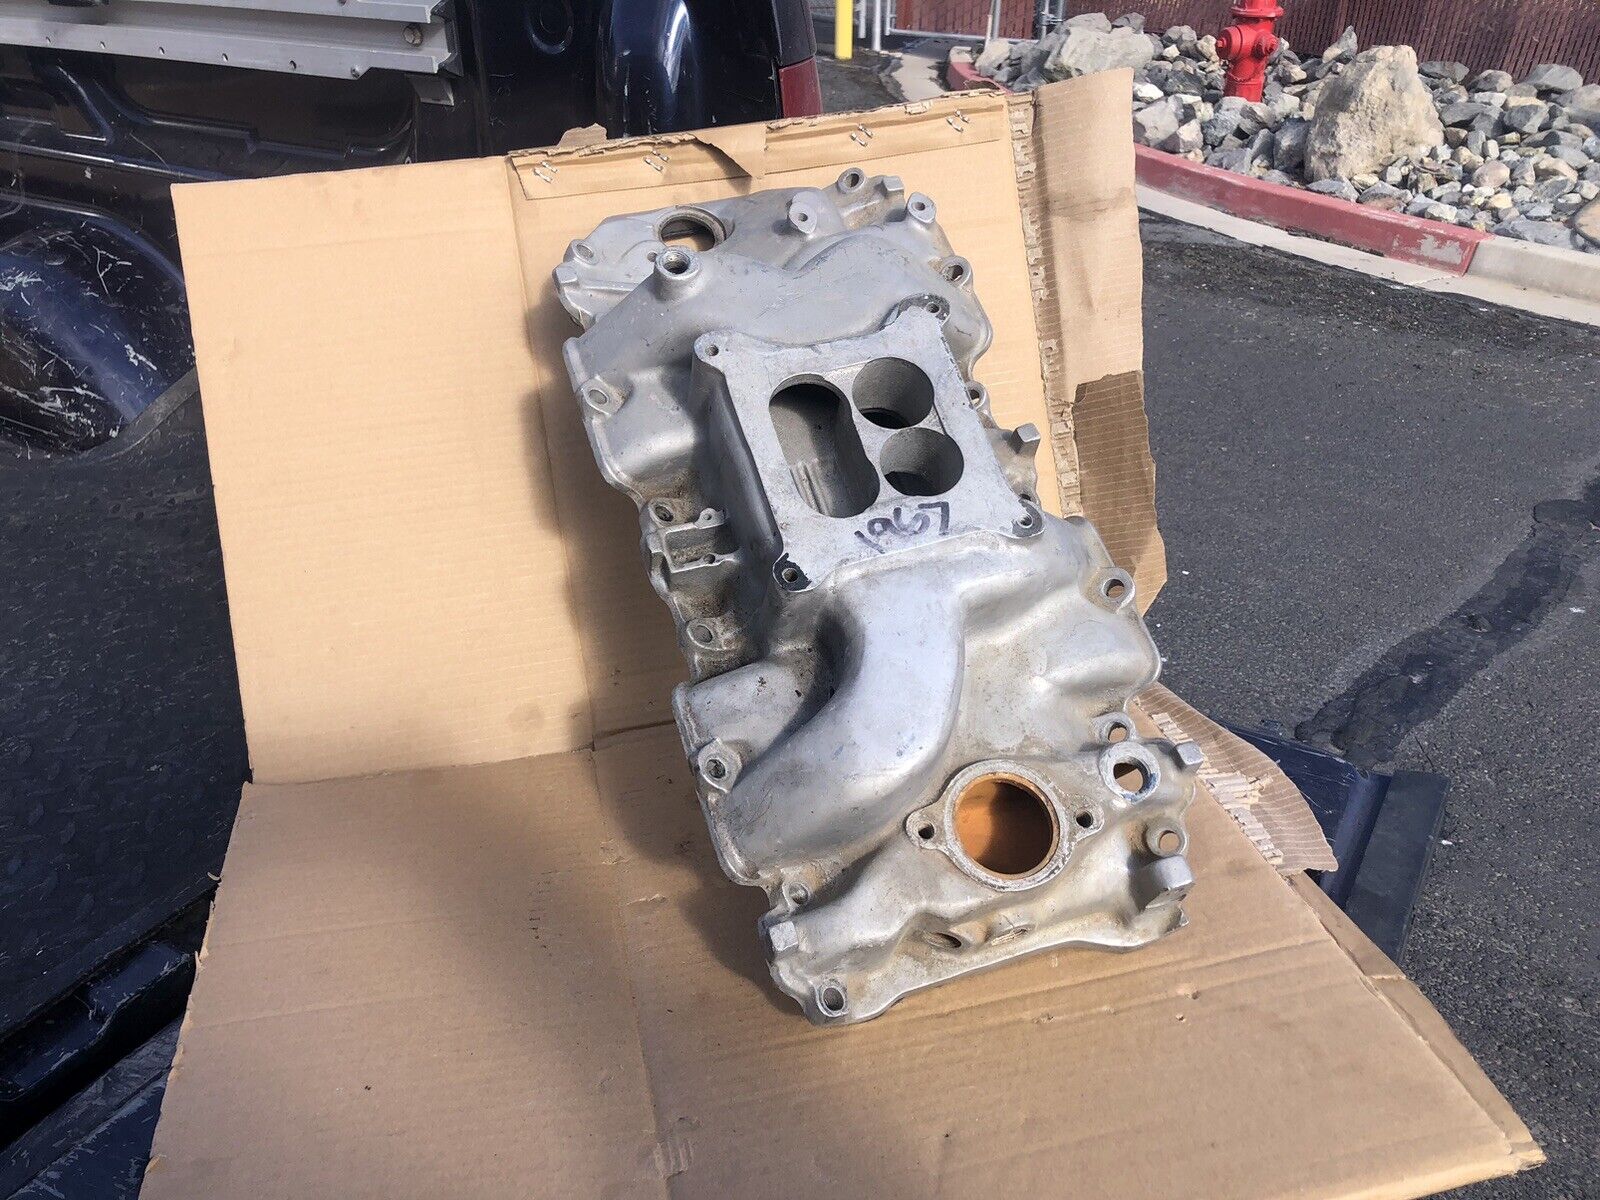 1967 Chevy Corvette Aluminum Intake 3885069 396 427 Dated 6/2/66 number milled